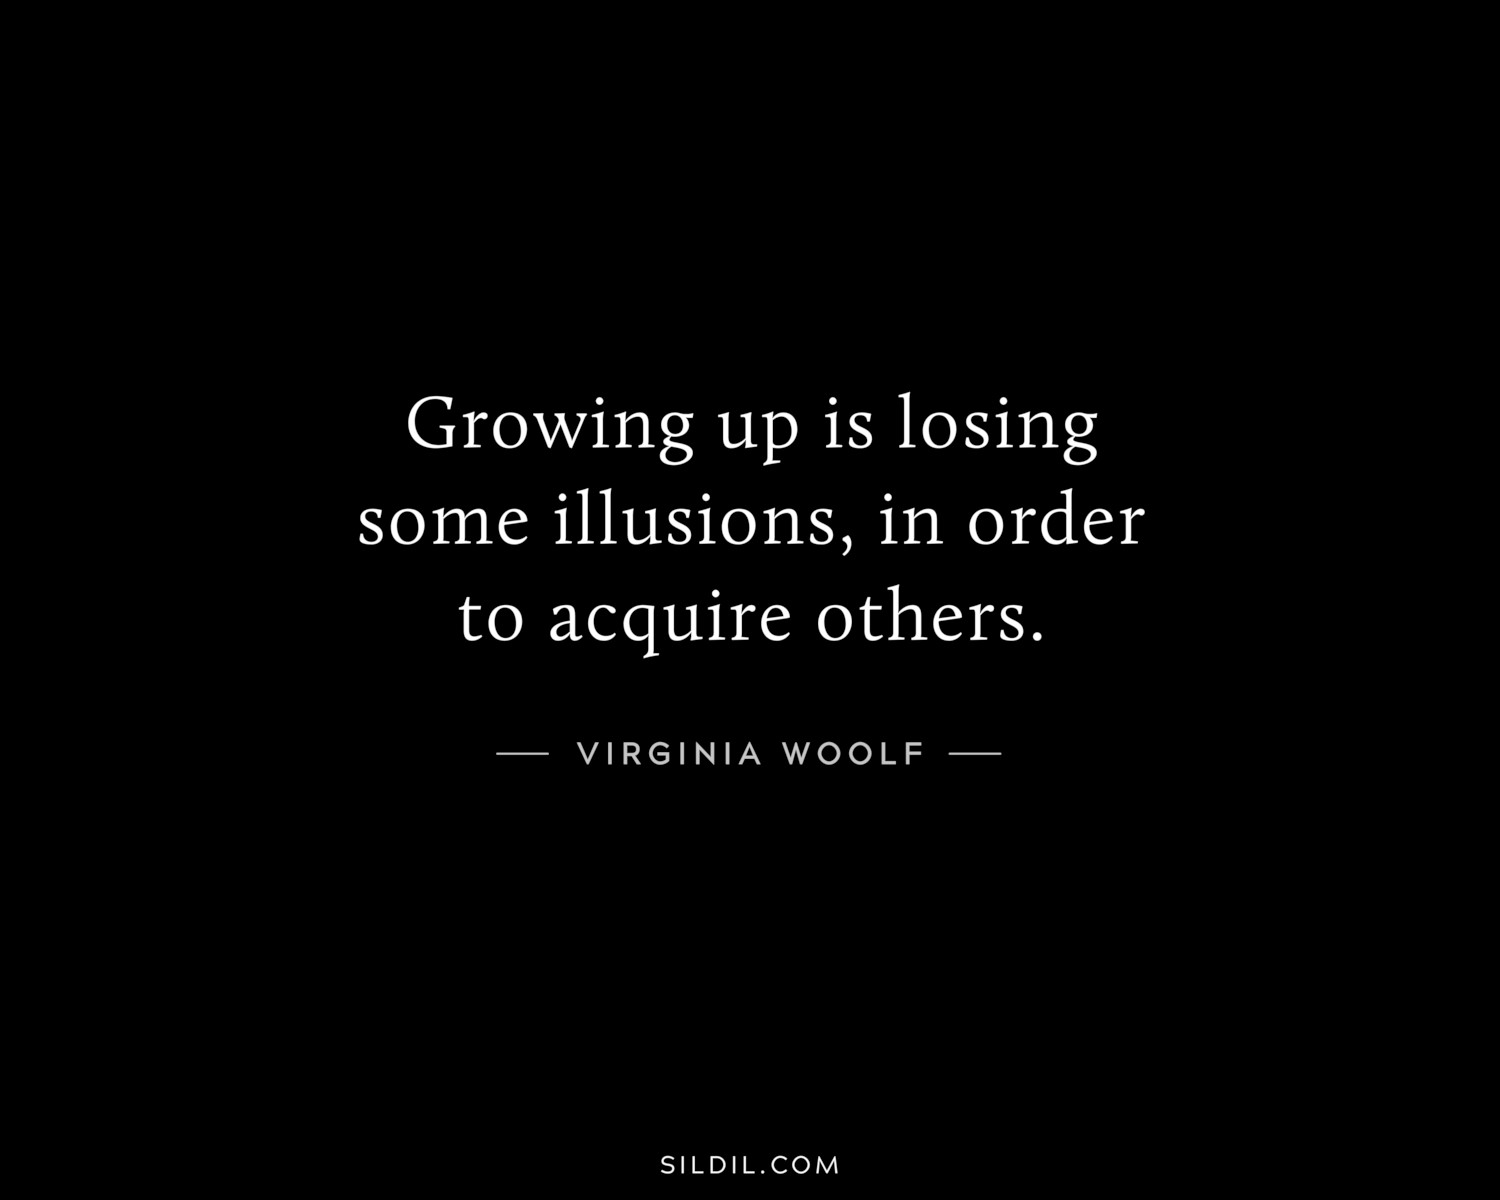 Growing up is losing some illusions, in order to acquire others.